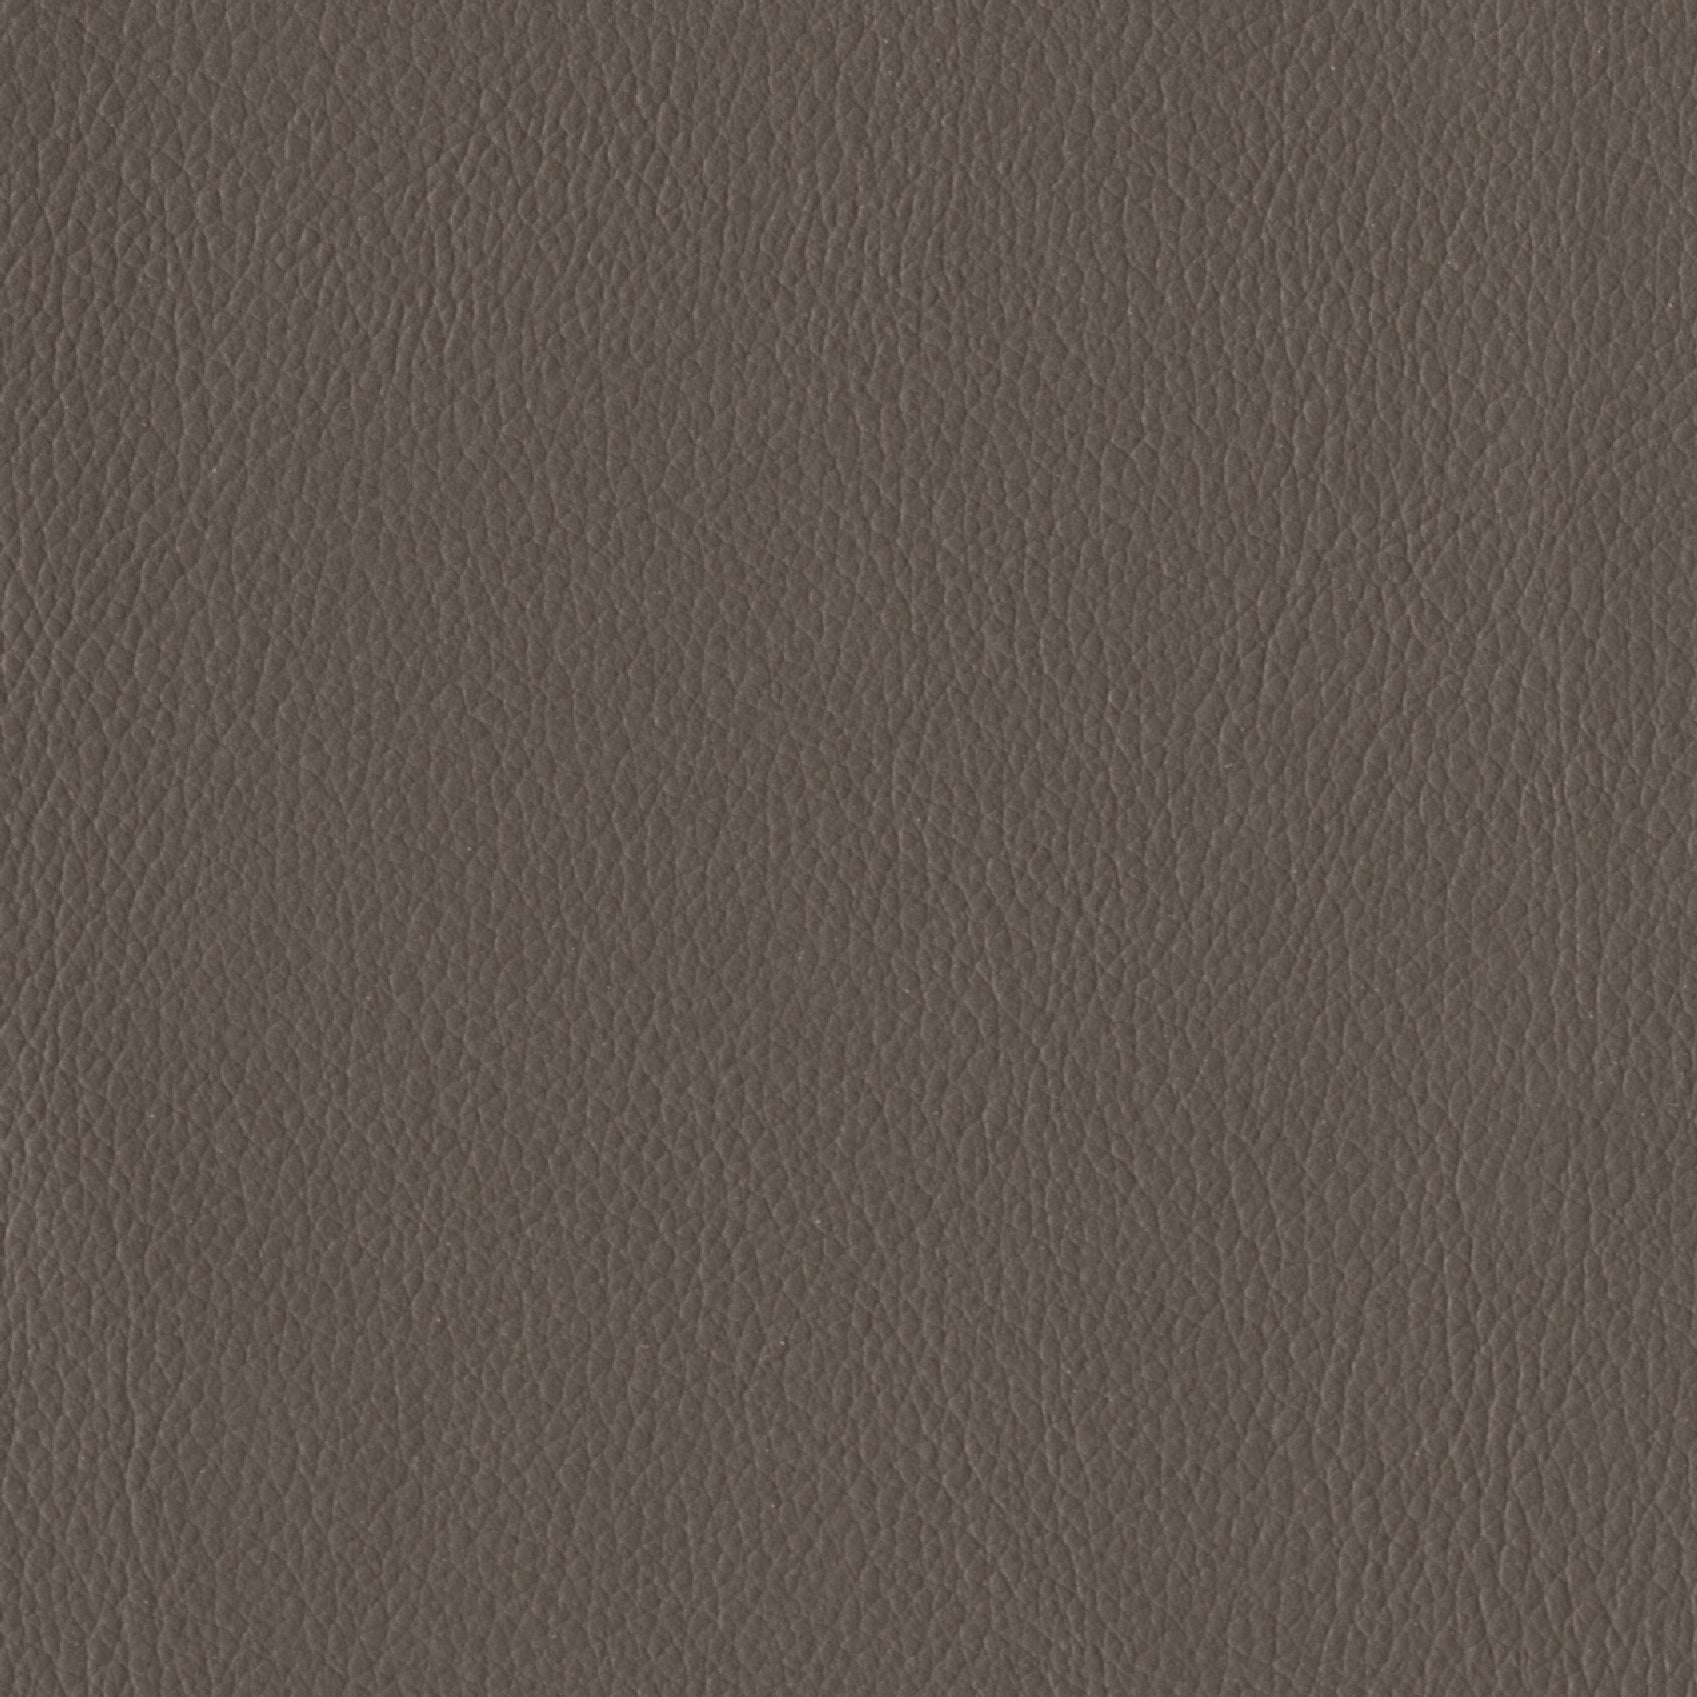     Andriali-Contract-Vinyl_Upholstery-Design-SultanFR-5-Color-060FRGrey-Width-140cm